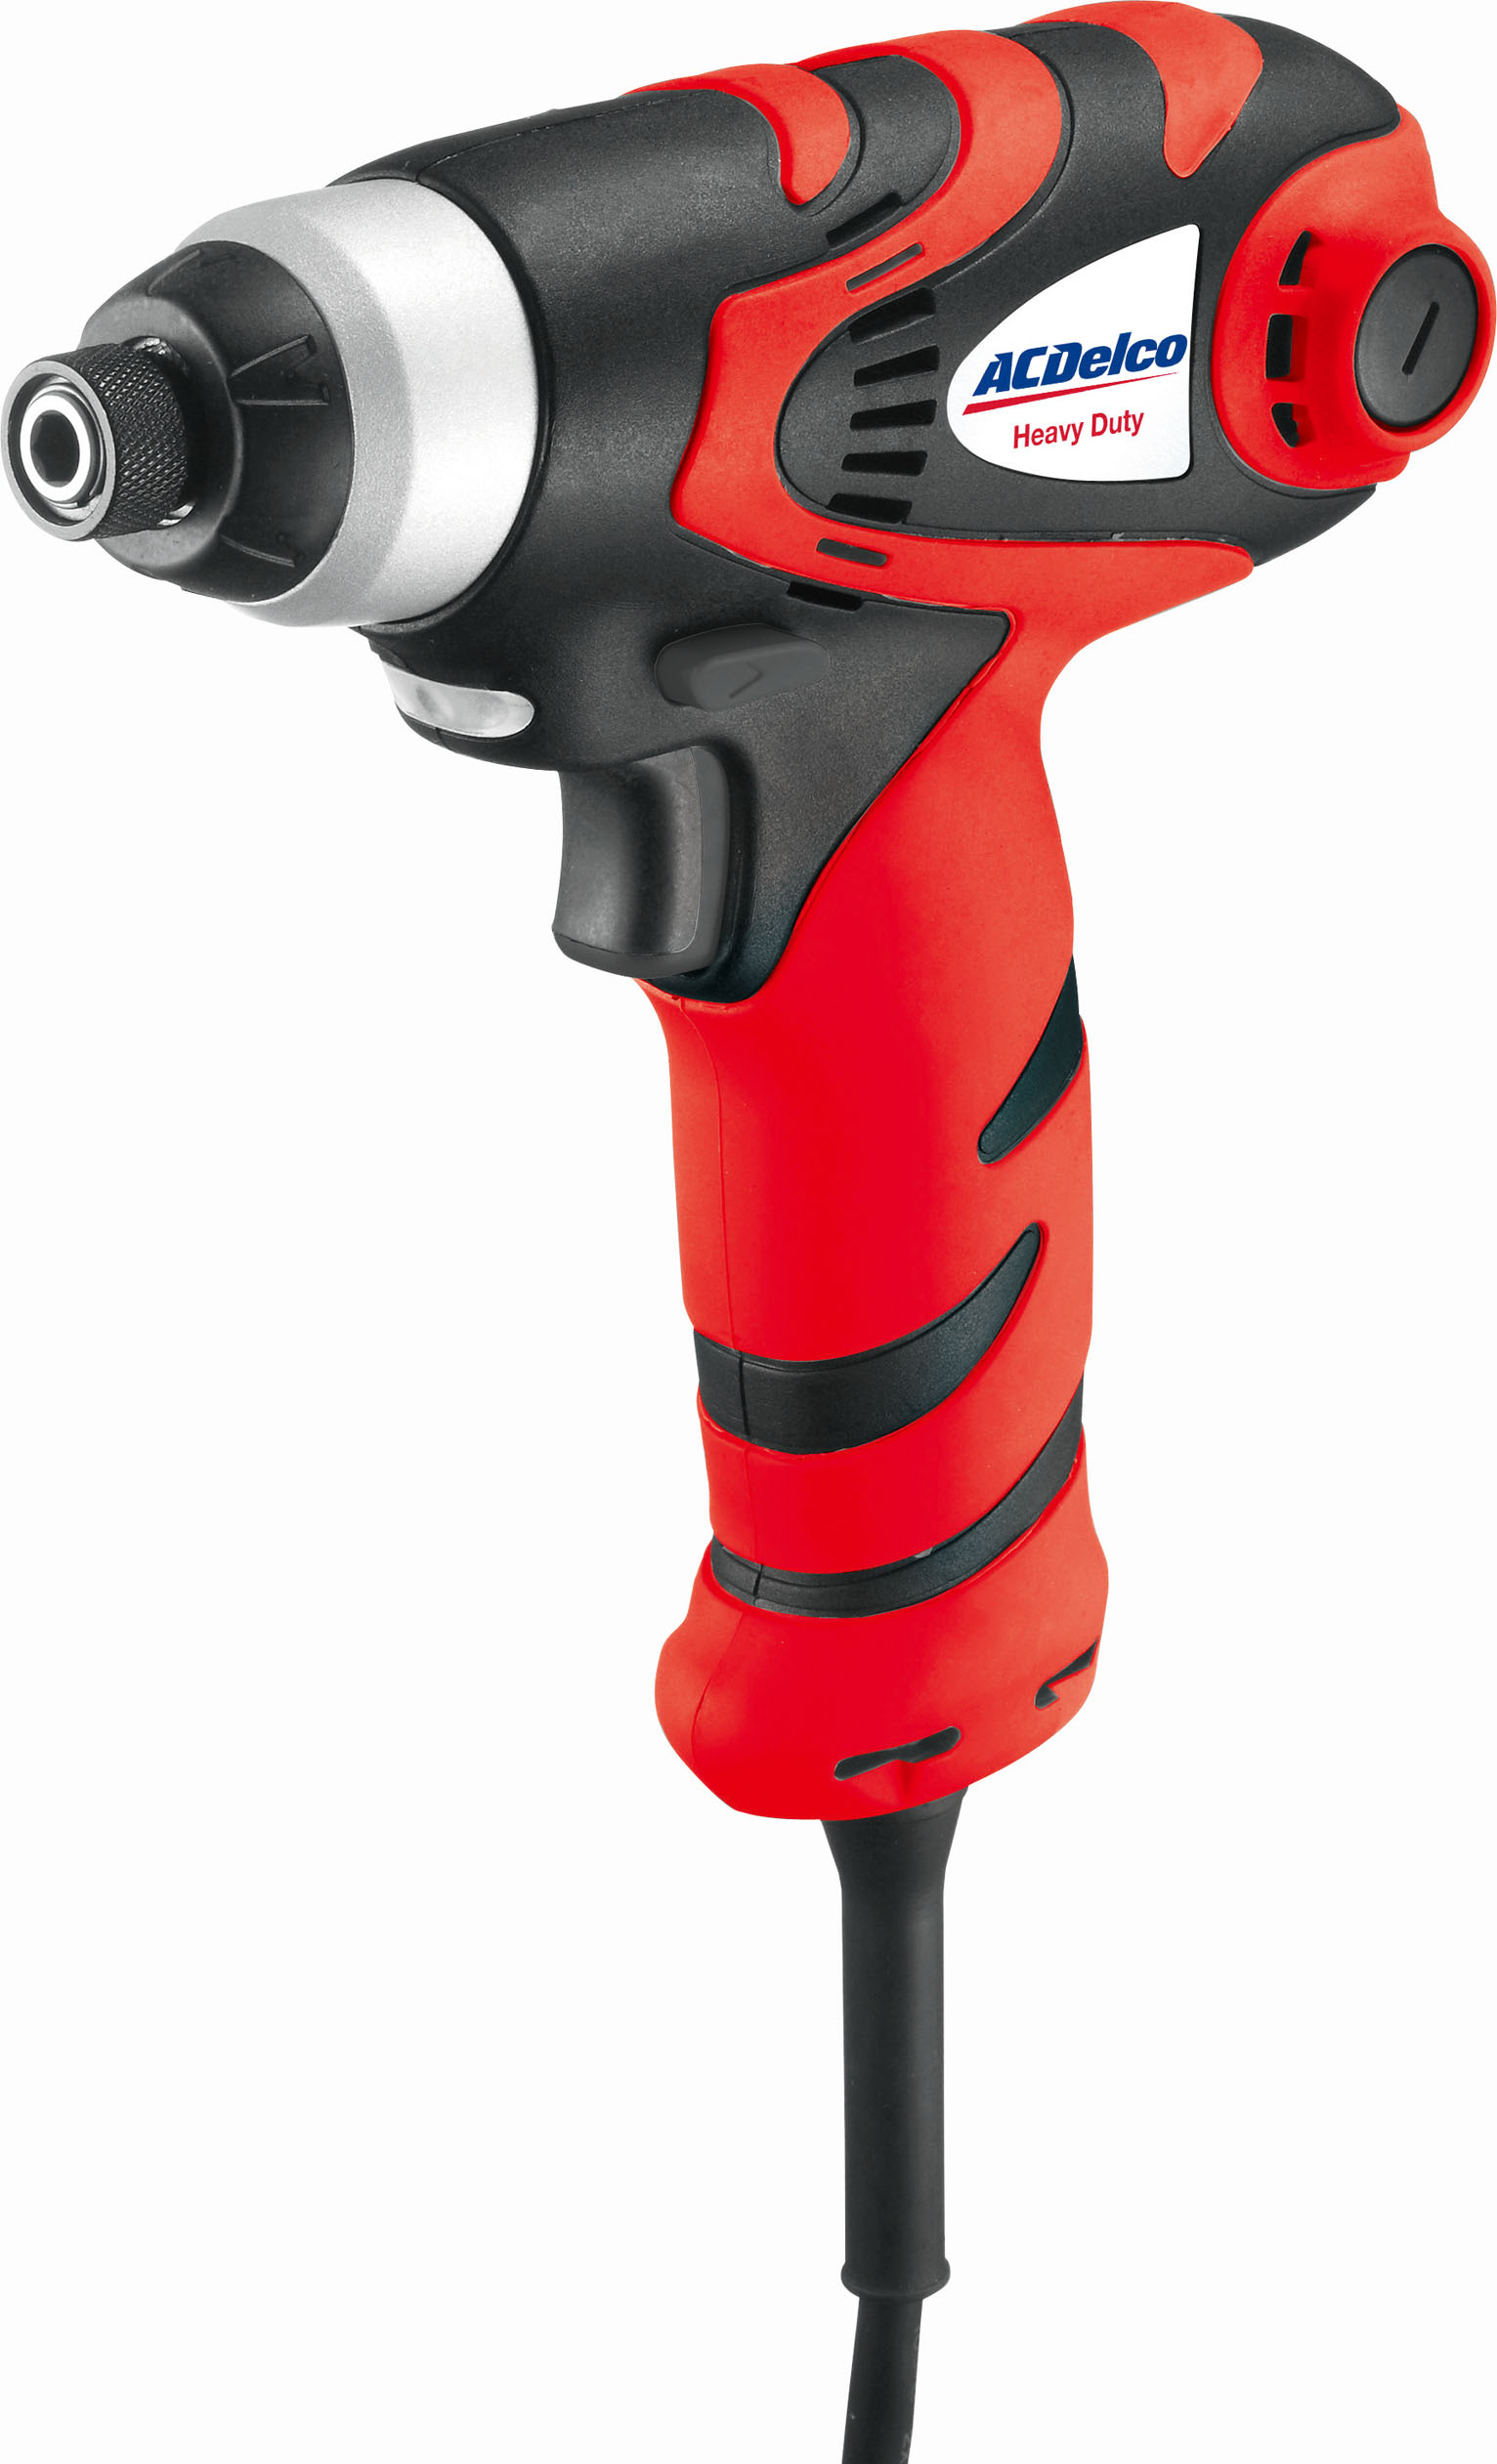 ACDelco Tools AEI1204 Corded Super Compact Impact Driver, 103 ft-lbs, Electric Imapct